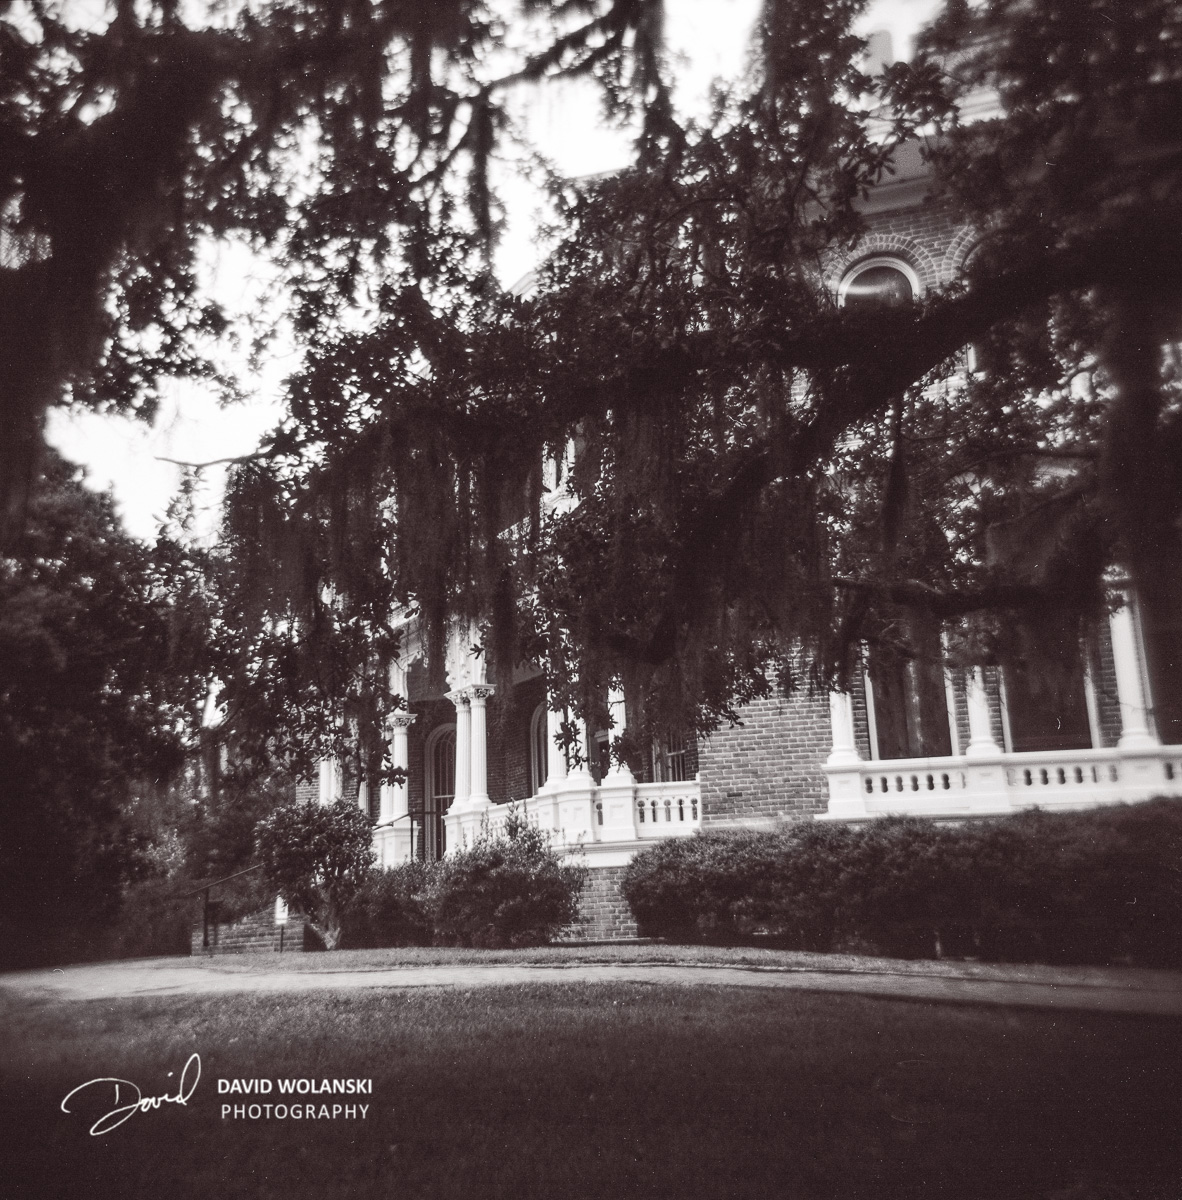 When I think of the deep south, I always think of Spanish Moss. Of course this mansion had plenty